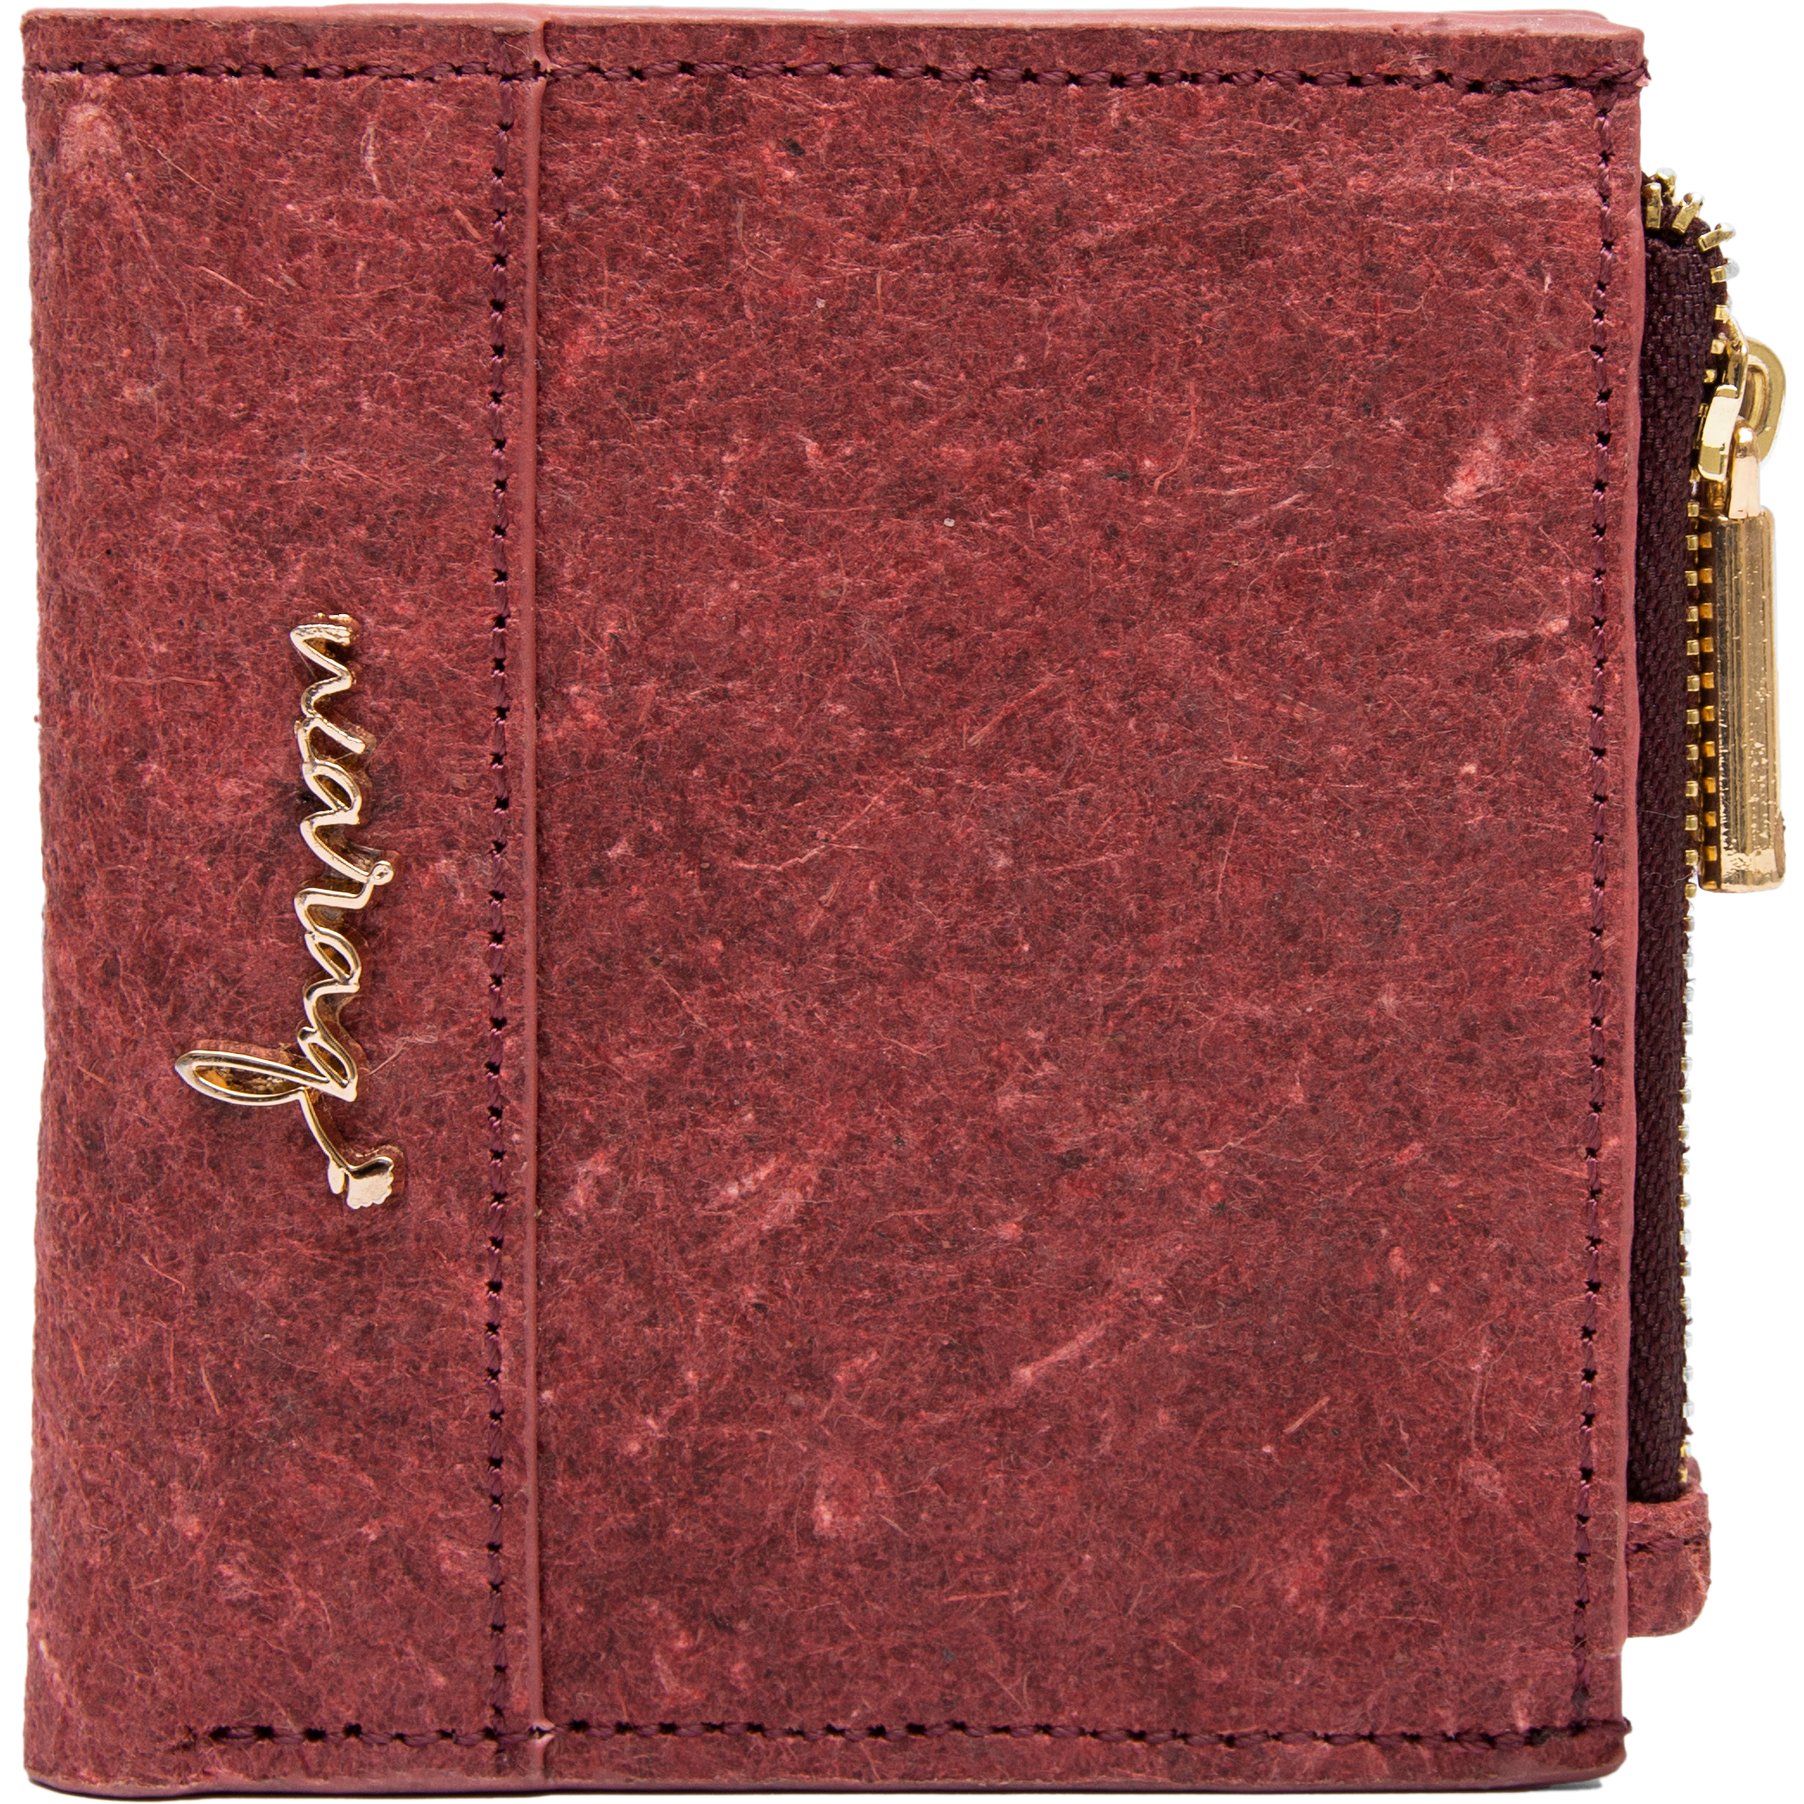 Rubia Small Wallet is made with environment friendly, cruelty free vegan material, making it sustainable luxury gift.